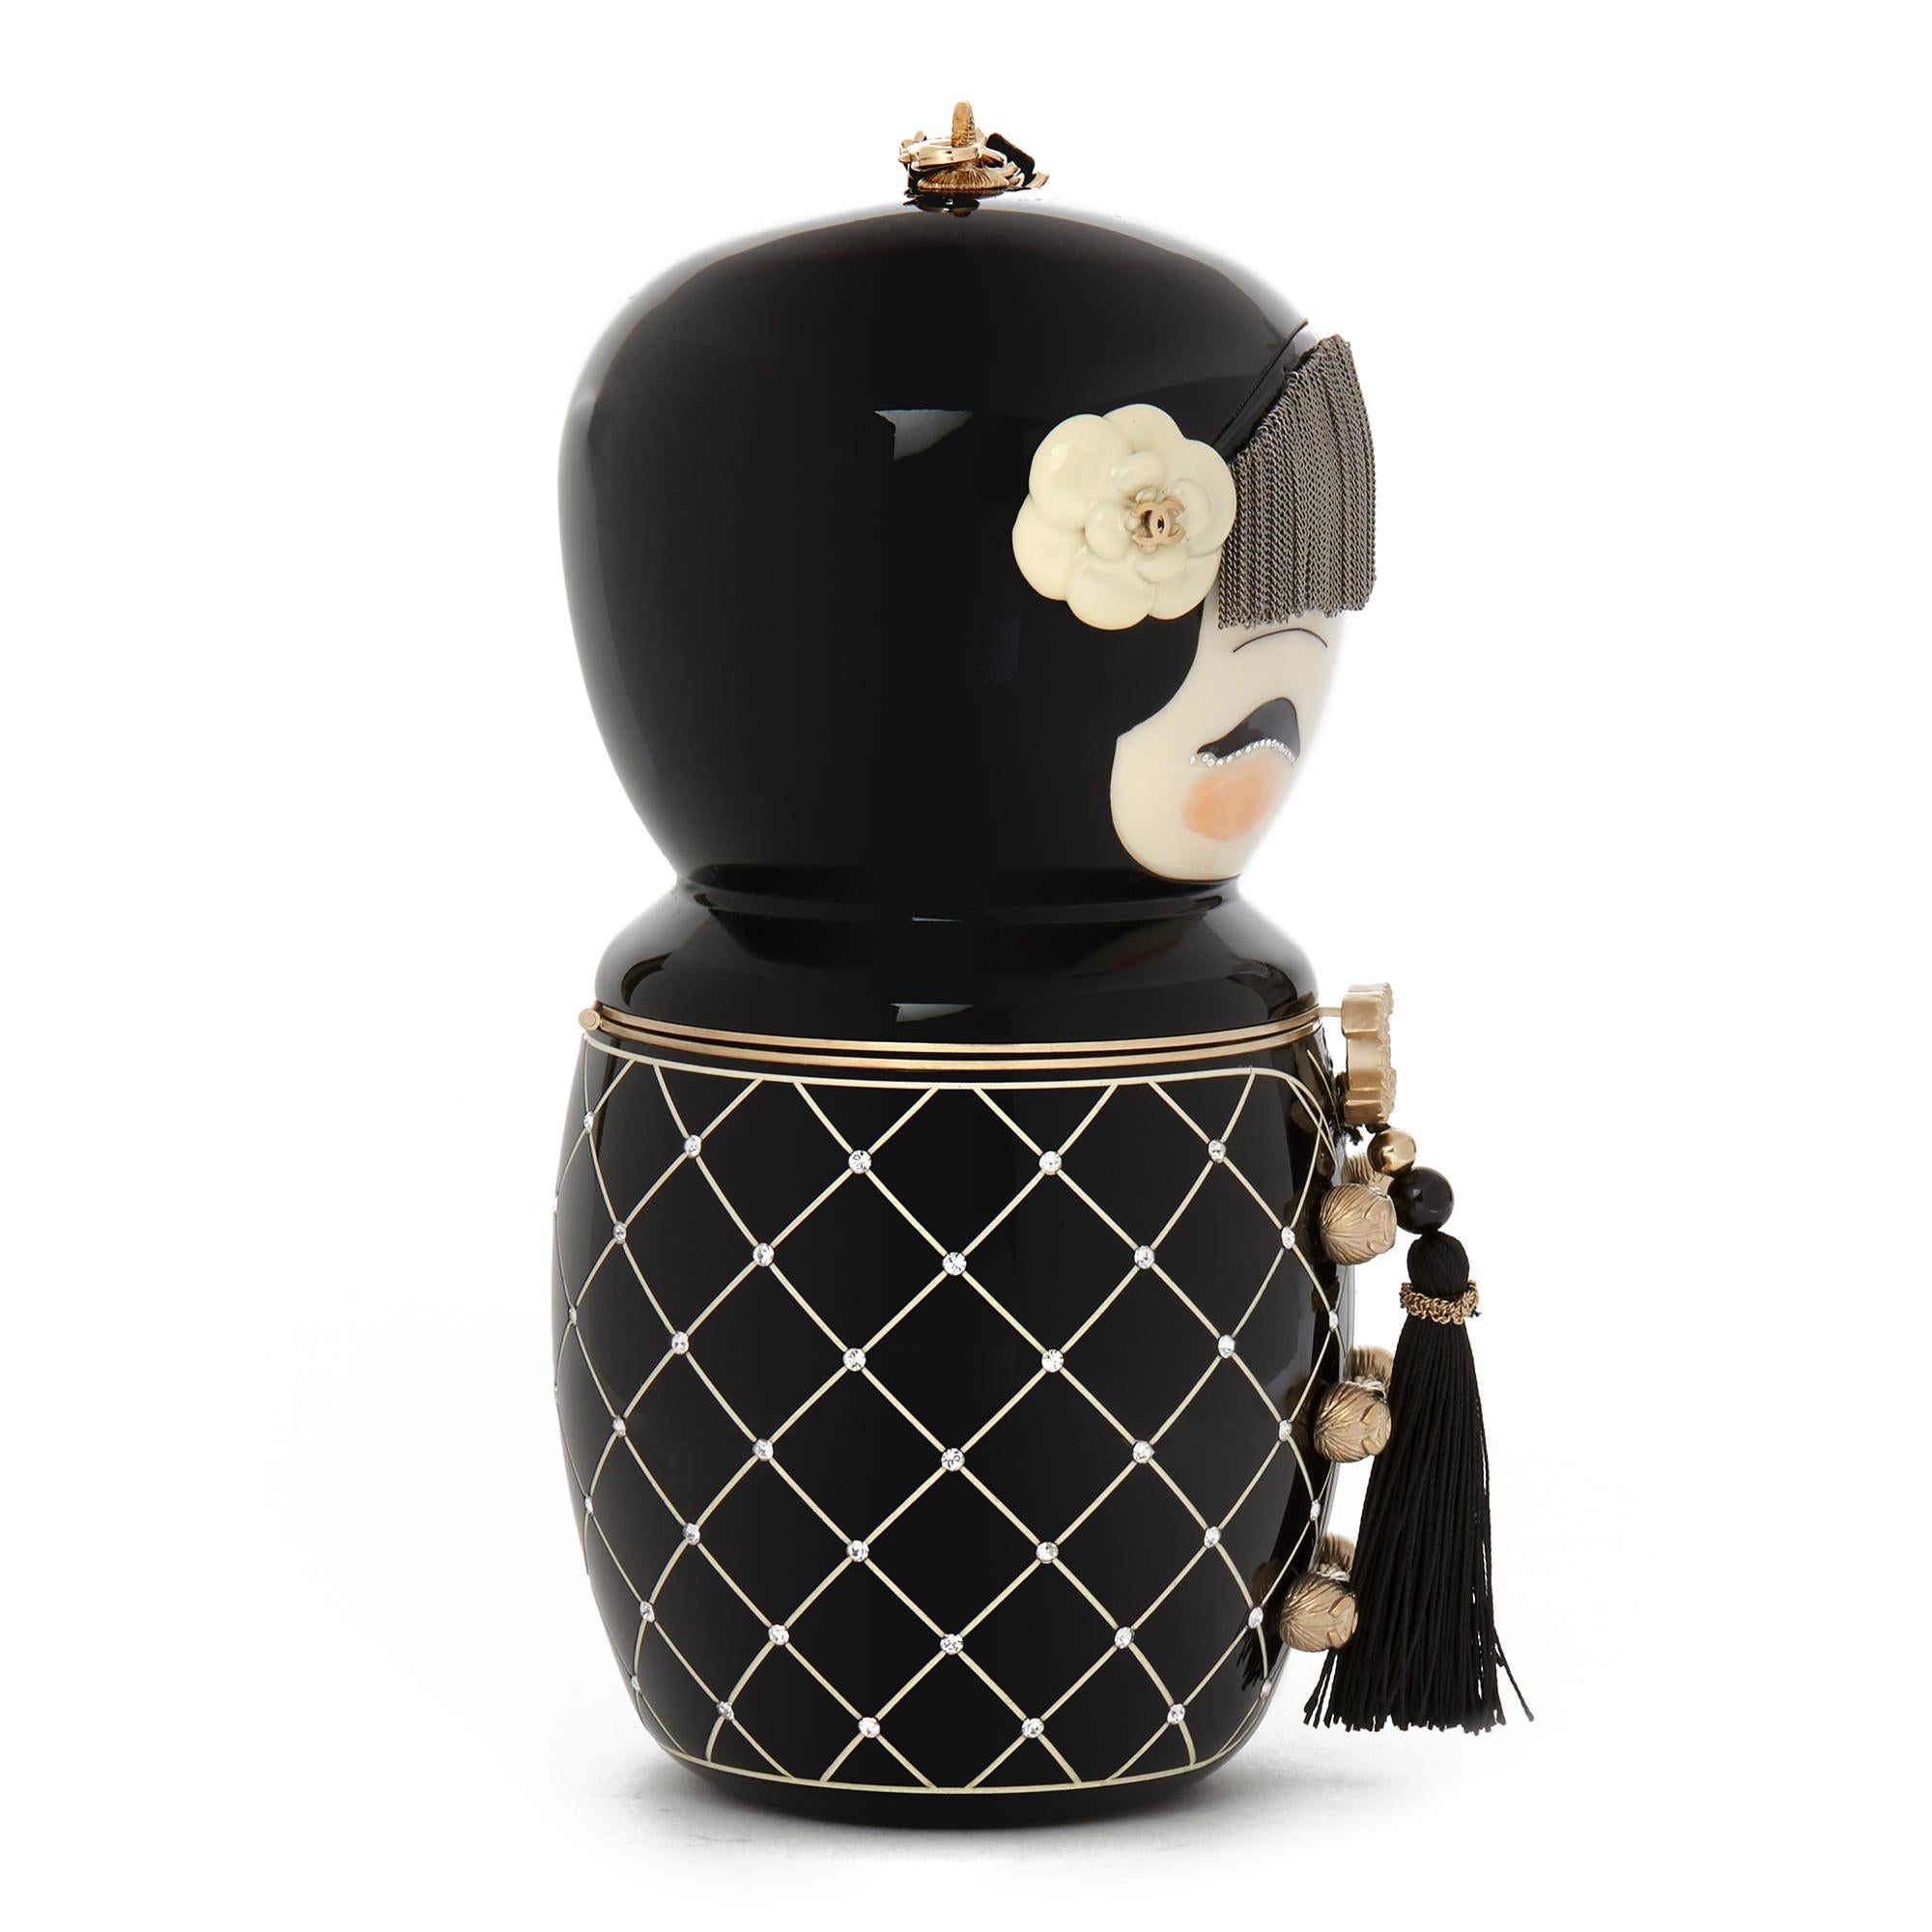 CHANEL
Black Plexiglass & Enamel Paris-Shanghai China Doll Minaudiere 

Reference: CB153
Age (Circa): 2010
Accompanied By: Chanel Dust Bag, Box
Authenticity Details: (Made in France)  - This item was aquired as a staff gift.
Gender: Ladies
Type: